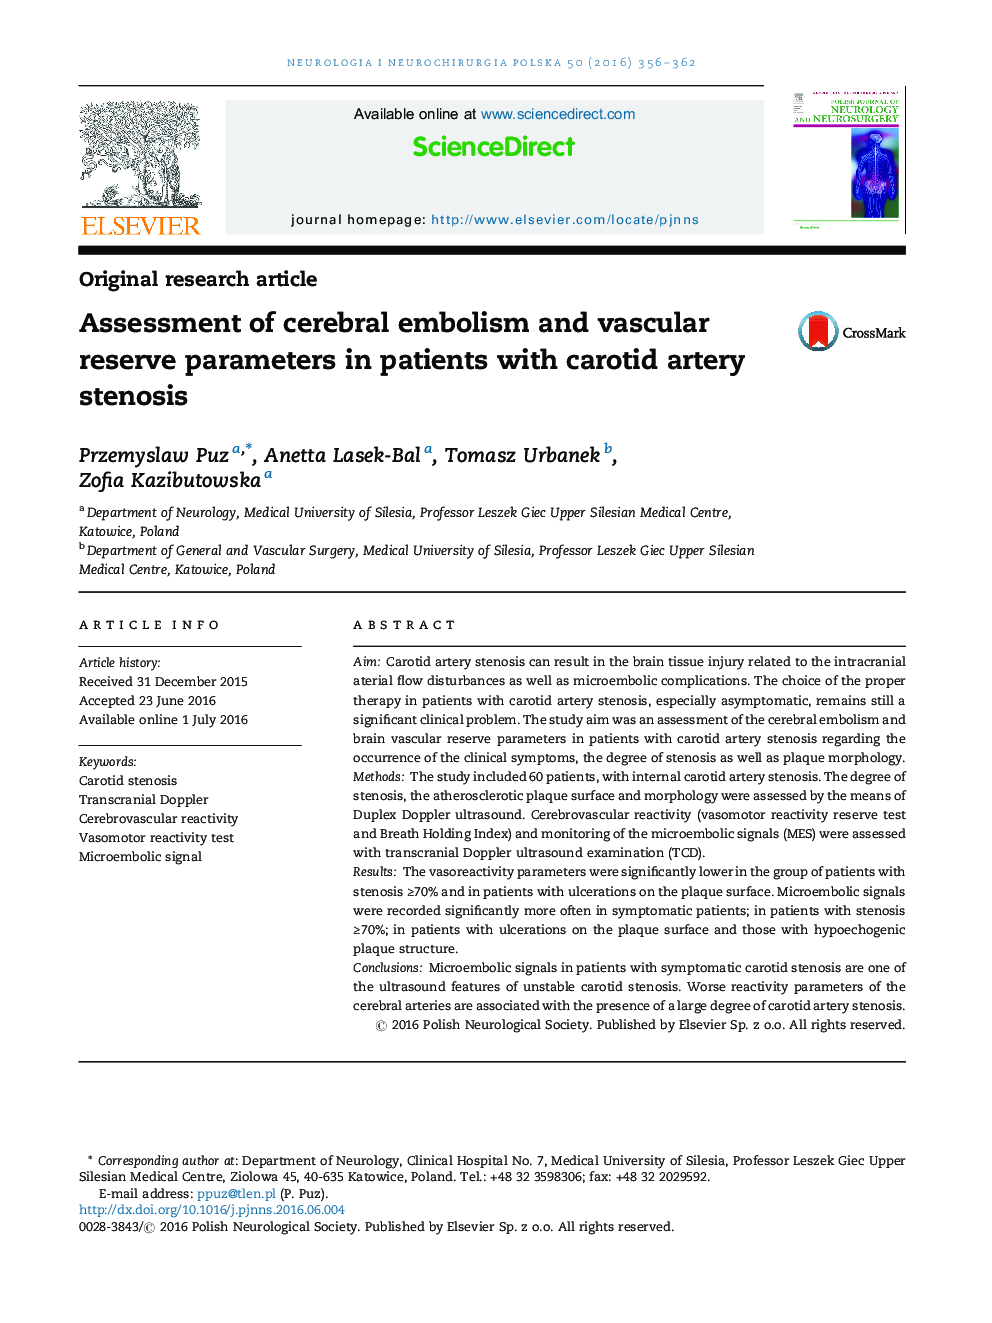 Assessment of cerebral embolism and vascular reserve parameters in patients with carotid artery stenosis